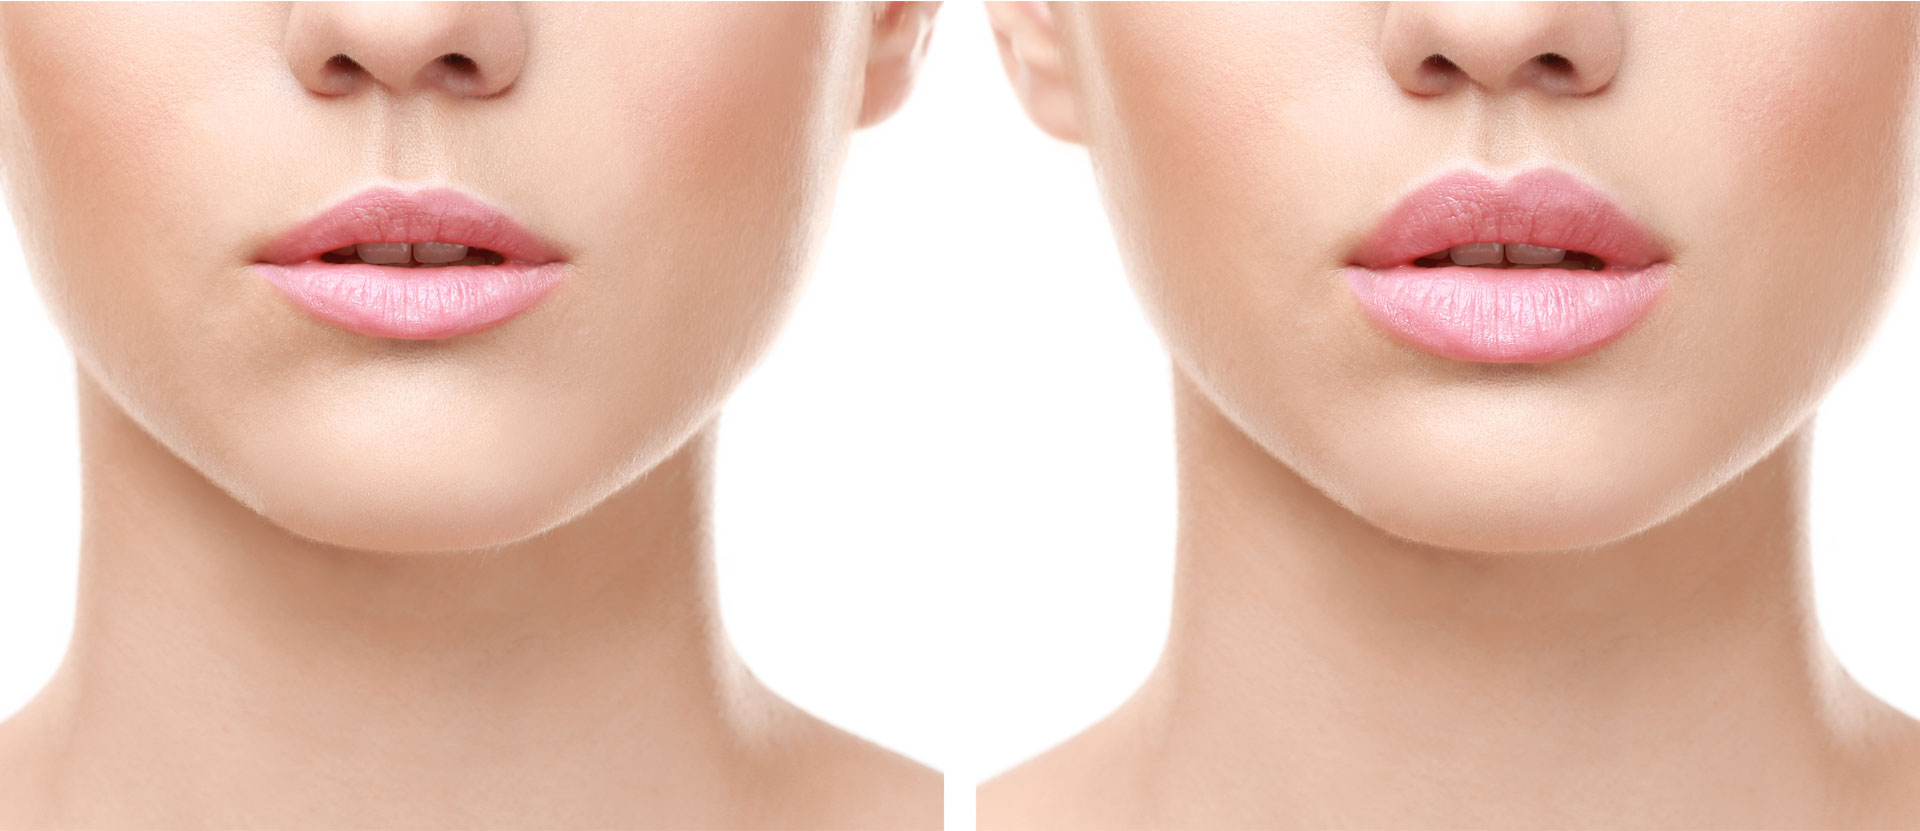 How To Tell If Someone Has Lip Fillers? 